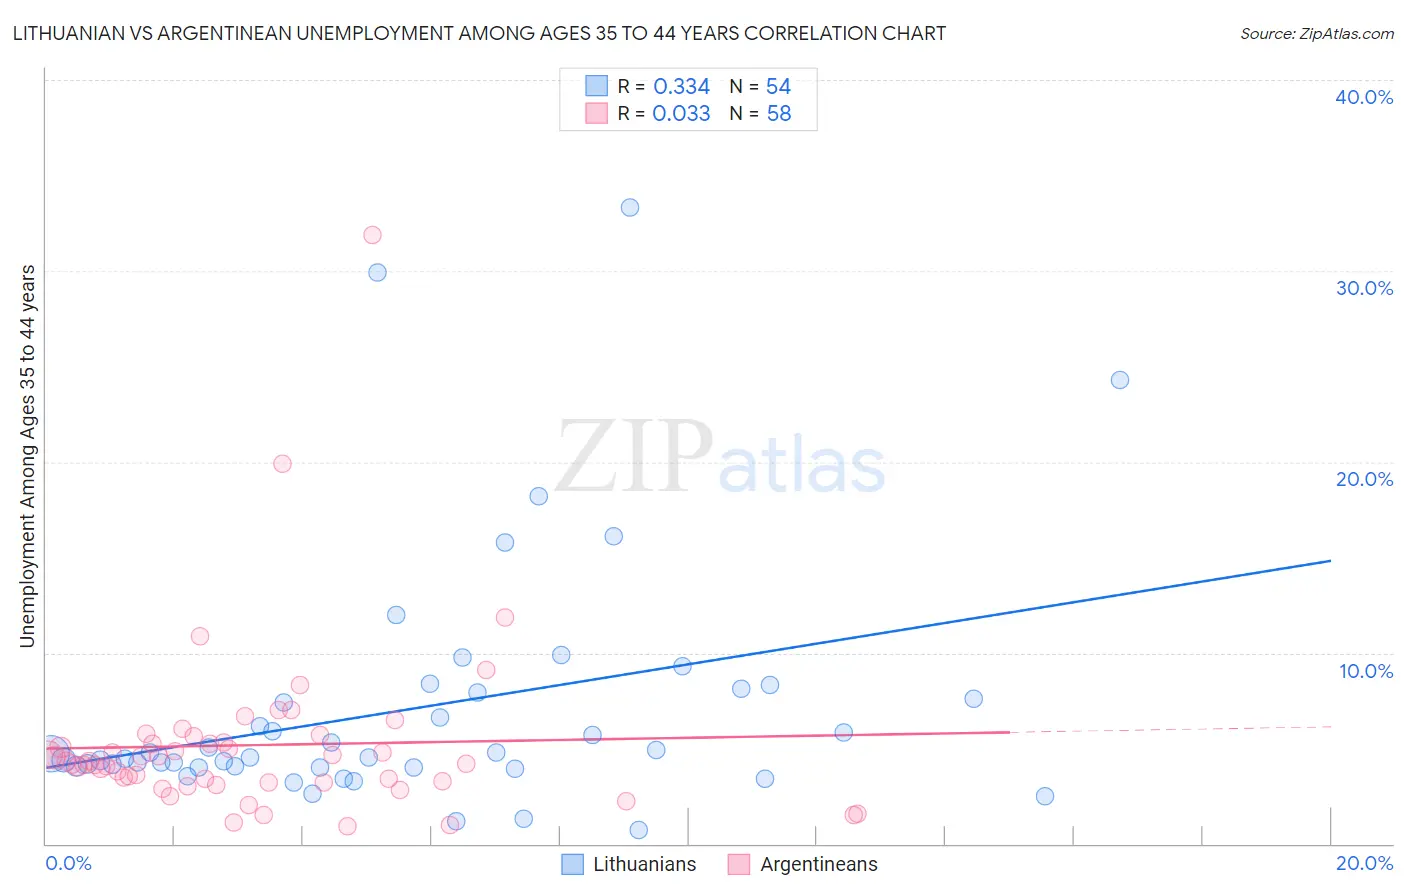 Lithuanian vs Argentinean Unemployment Among Ages 35 to 44 years